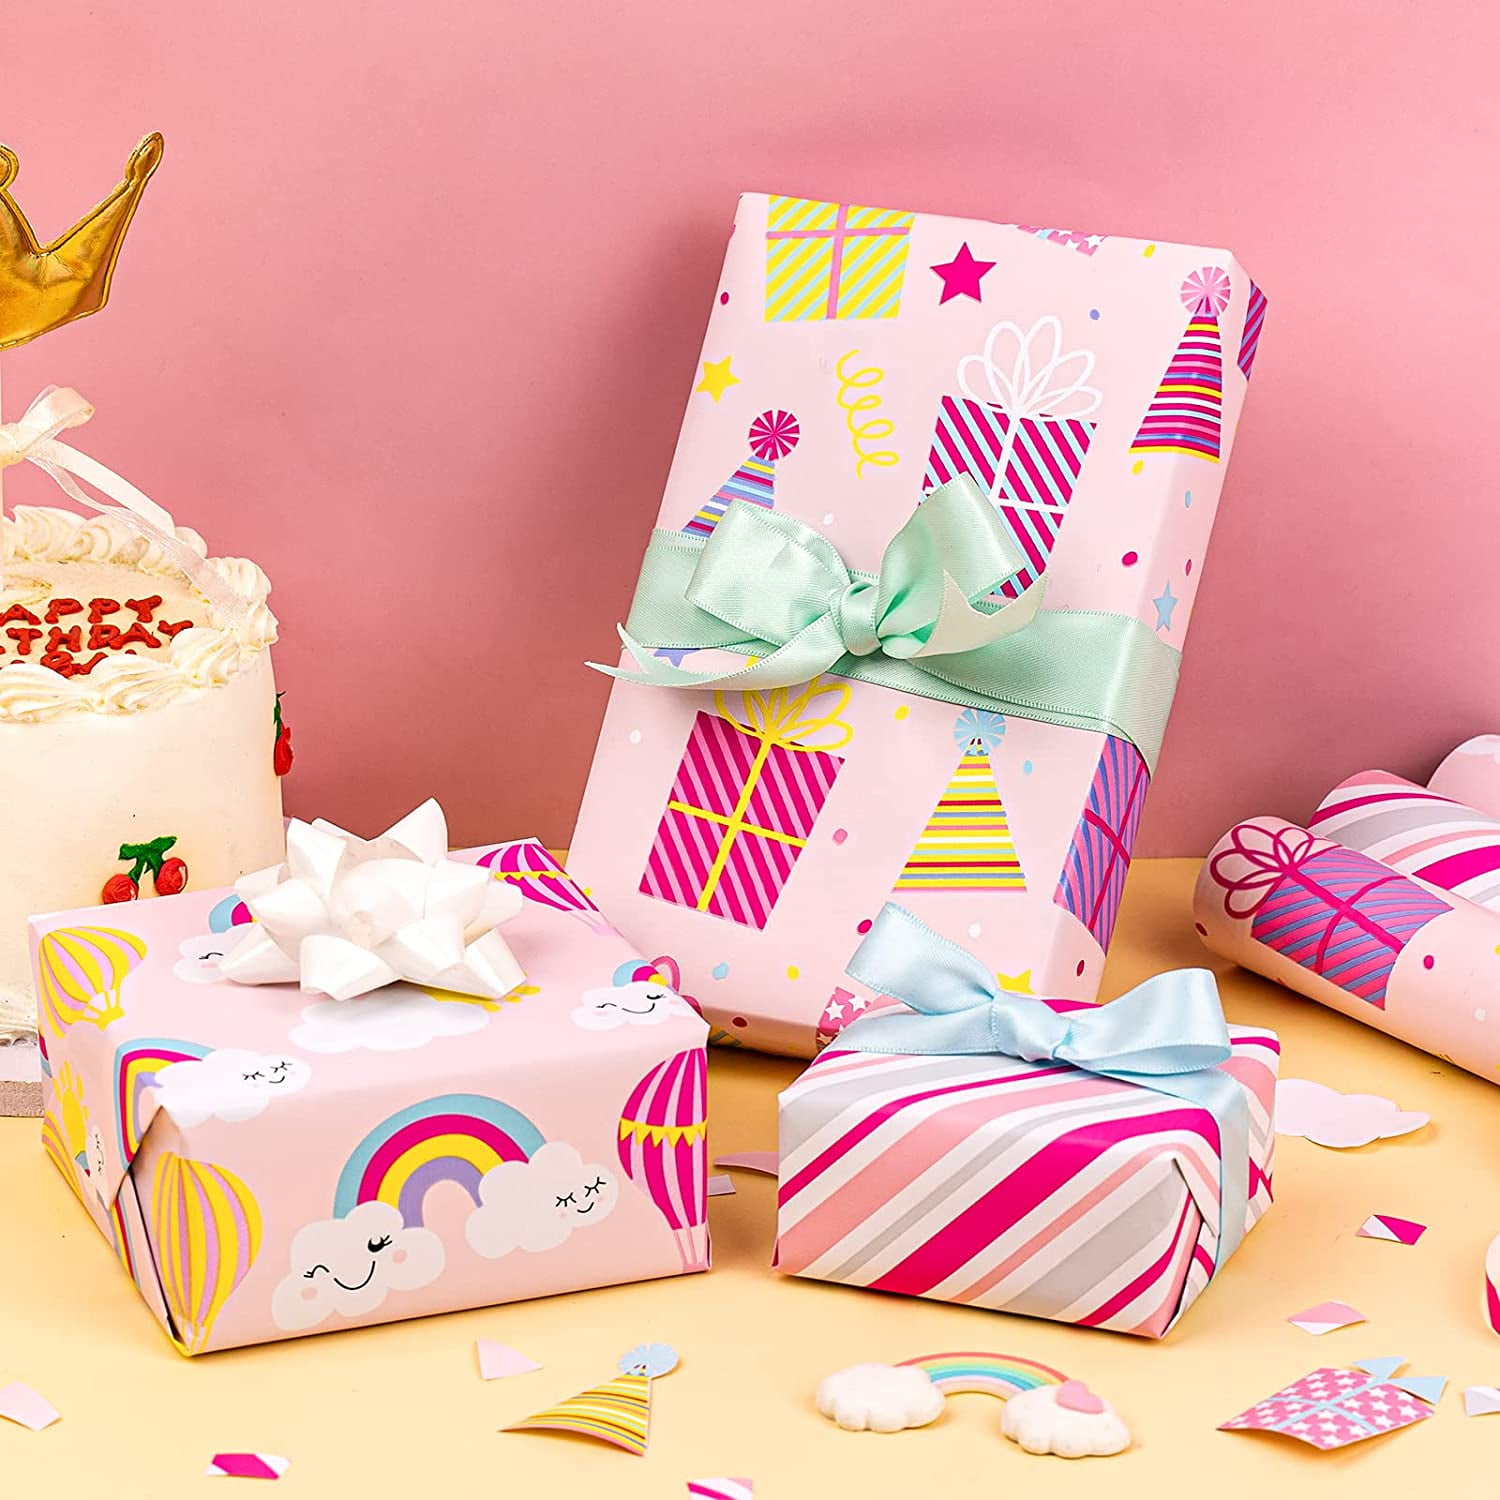 12m Happy Birthday Gift Wrapping Paper - 4 x 3m Roll's - Unisex Male Female